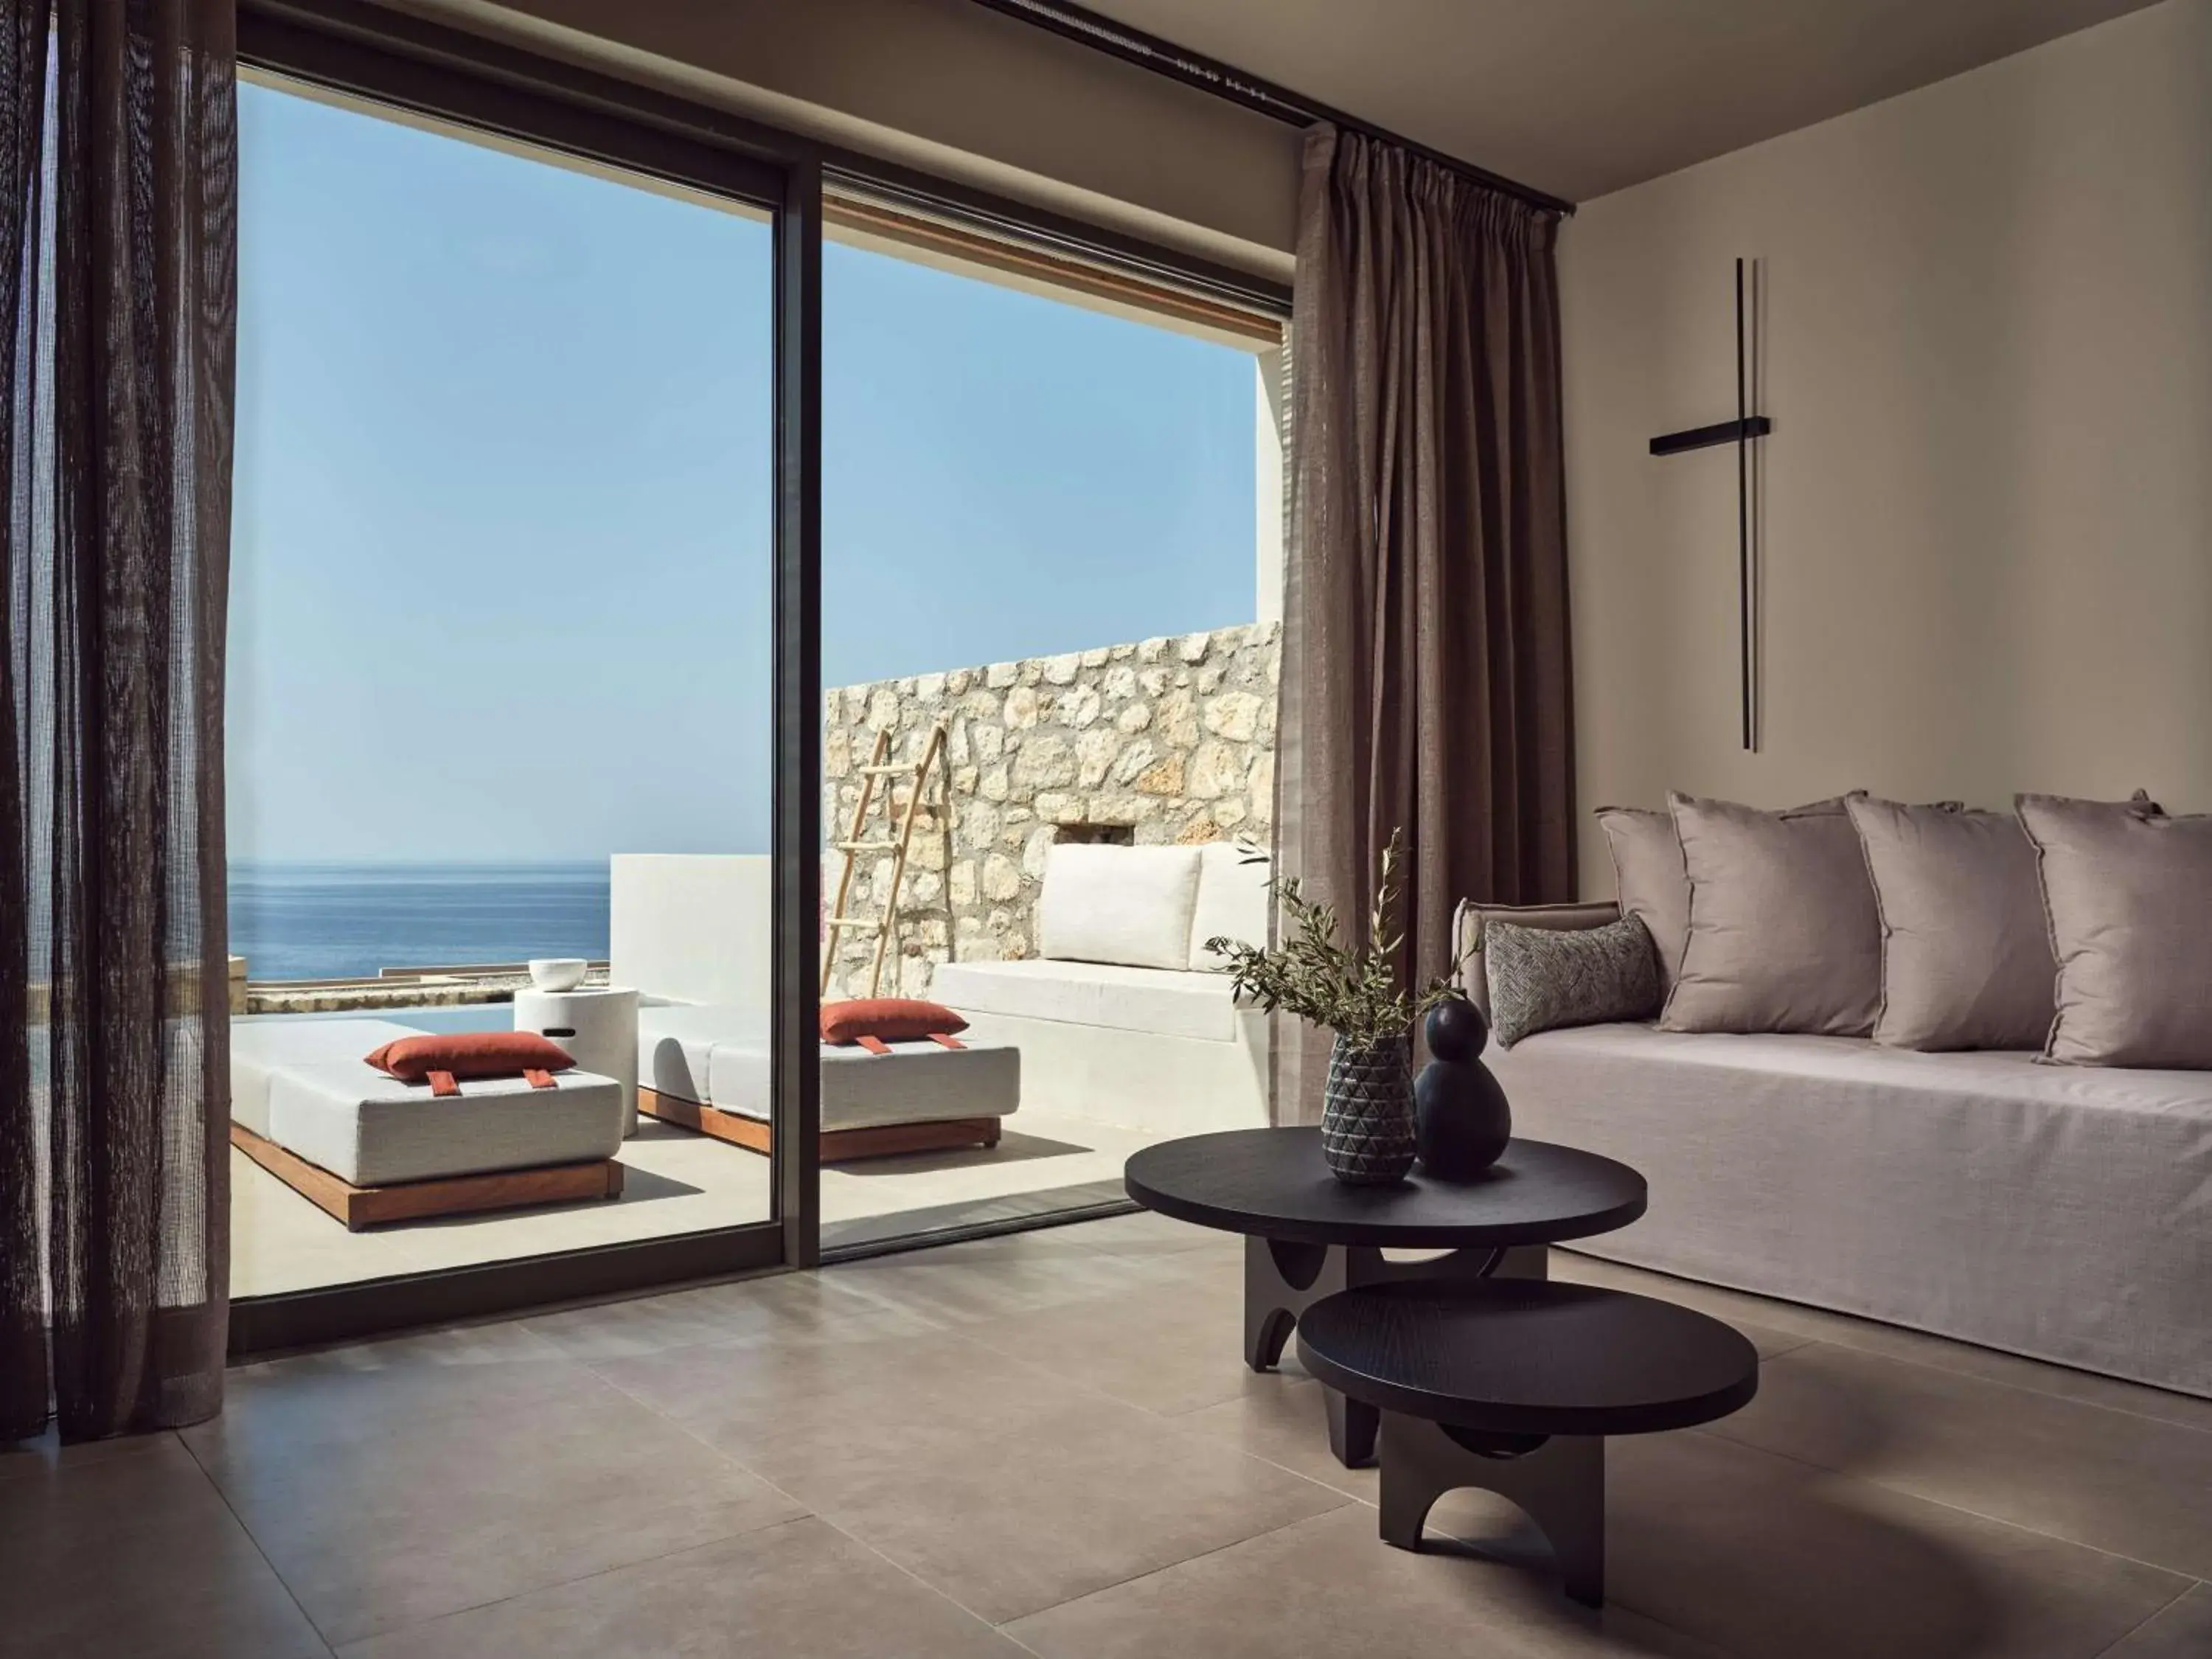 Bedroom, Seating Area in The Royal Senses Resort Crete, Curio Collection by Hilton